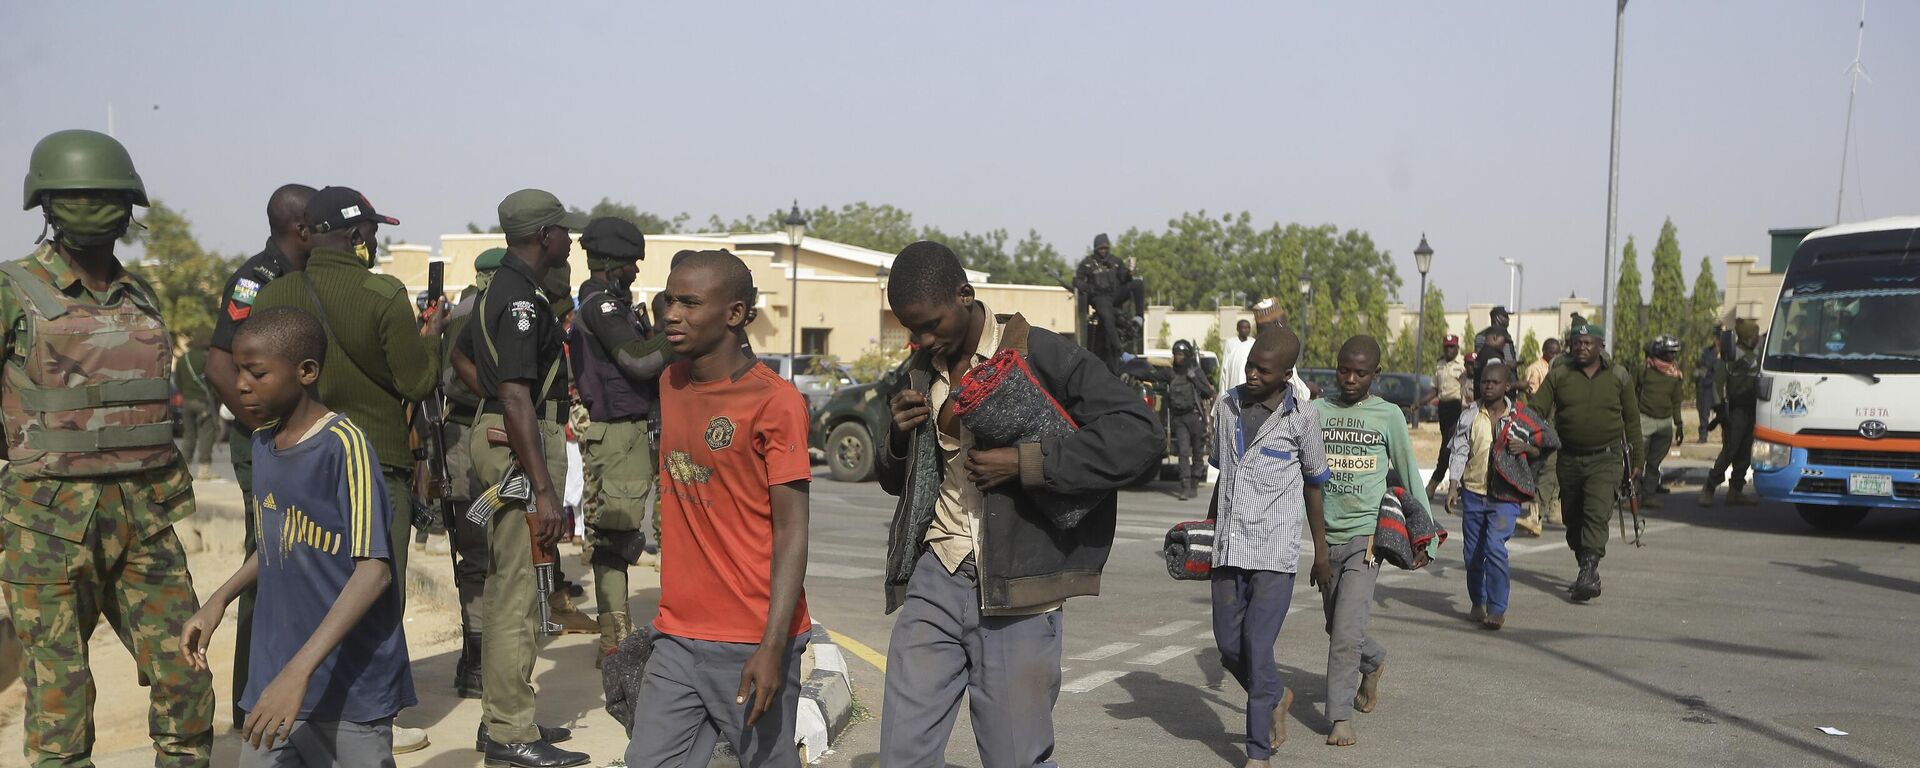 A group of schoolboys are escorted by Nigerian military and officials following their release after they were kidnapped last week, Friday Dec. 18, 2020 in Katsina, Nigeria. - Sputnik International, 1920, 28.12.2022